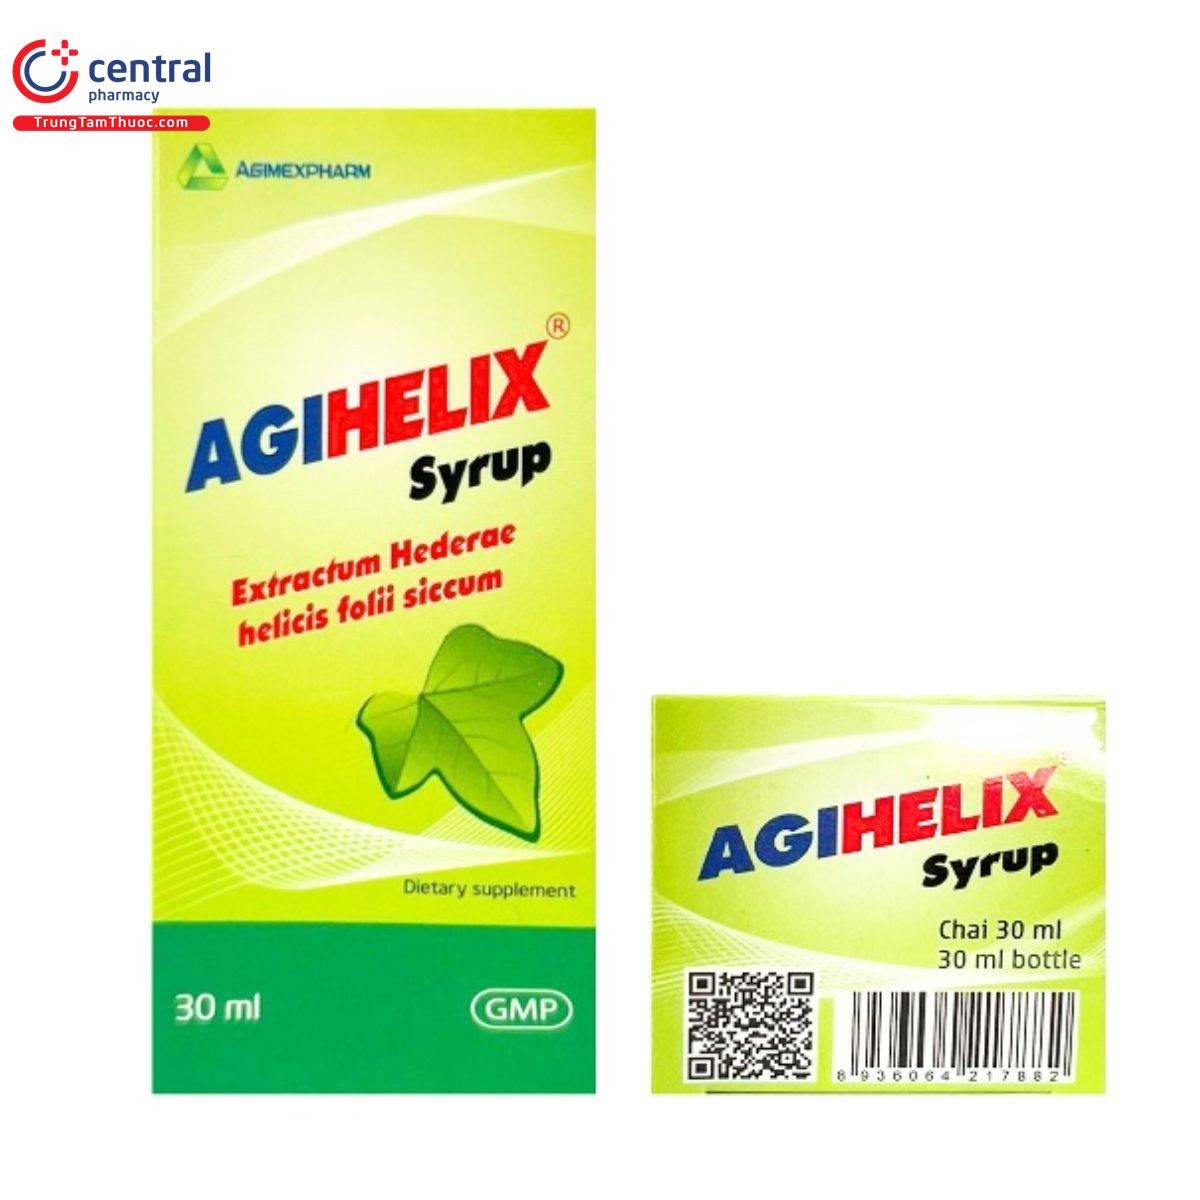 agihelix syrup 5 L4144